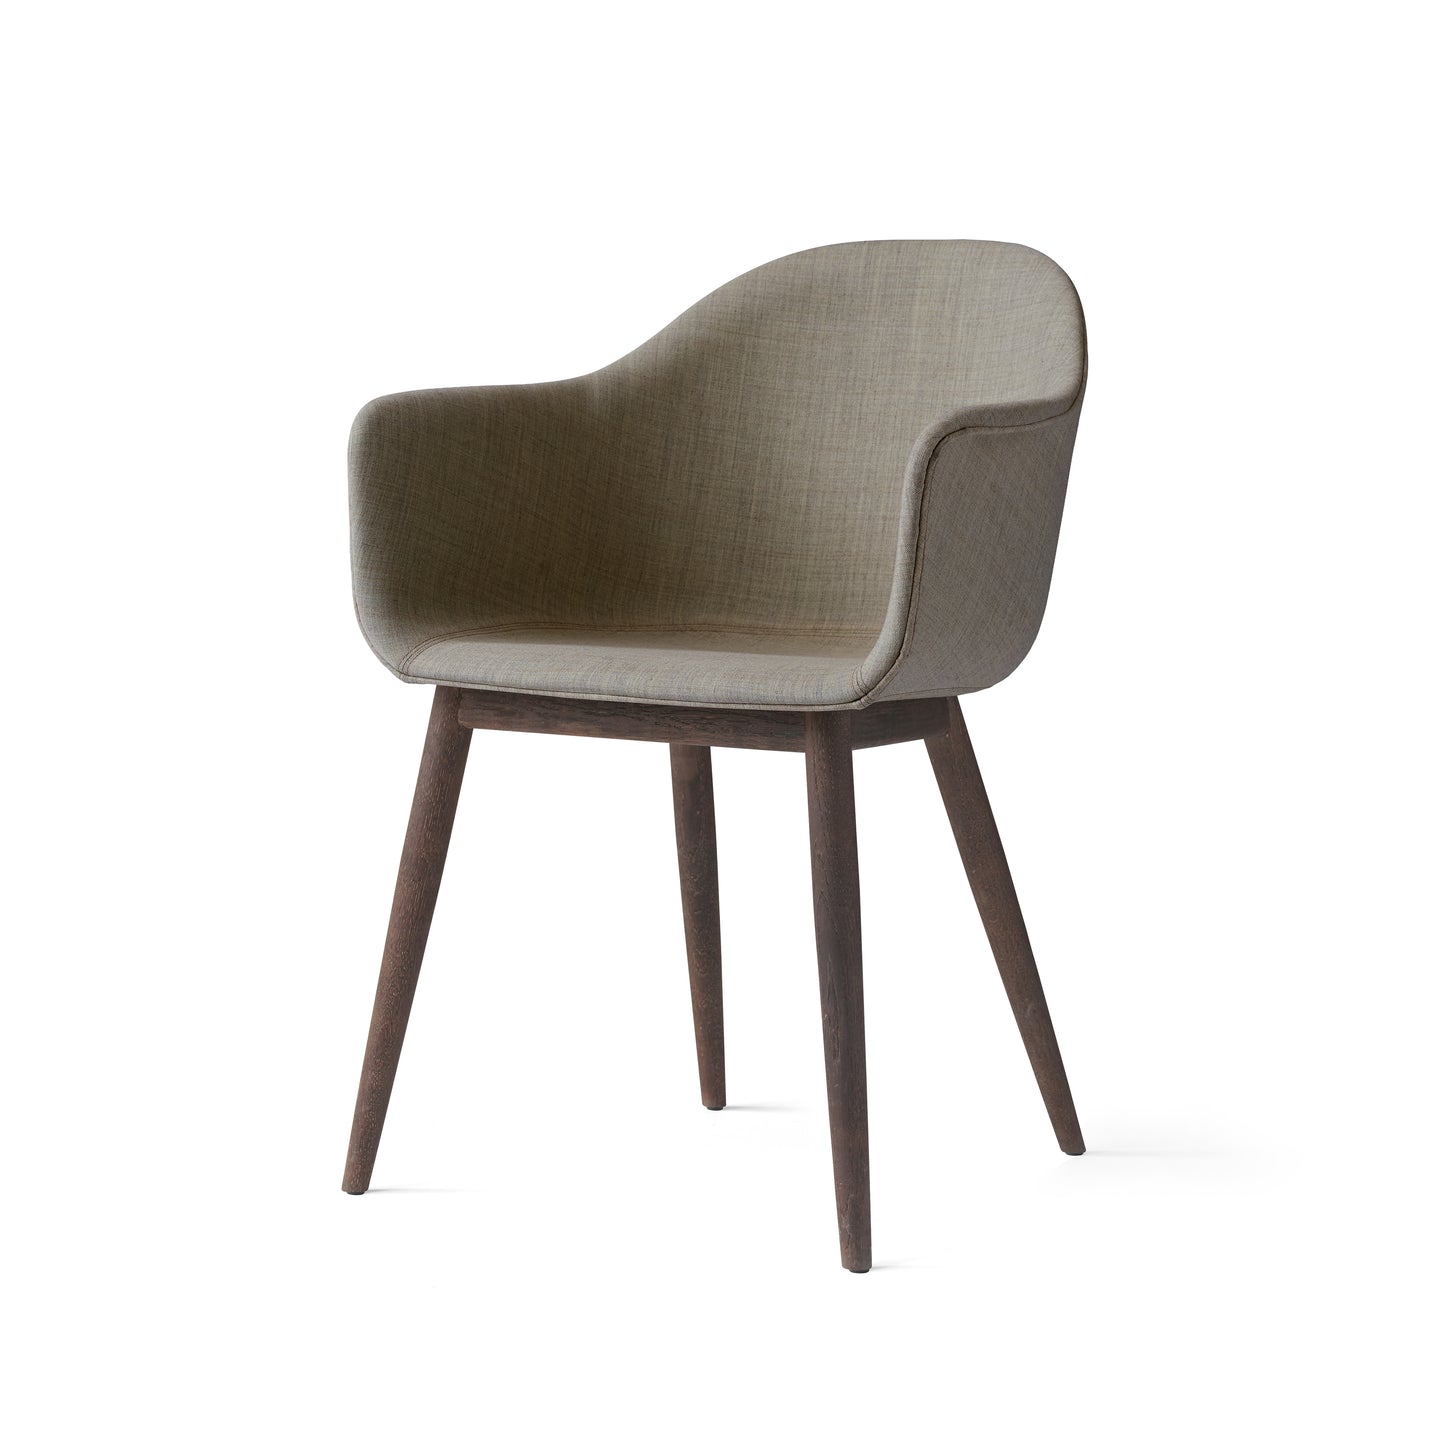 Harbour Chair, Wooden Base - Fully Upholstered by Menu / Audo Copenhagen